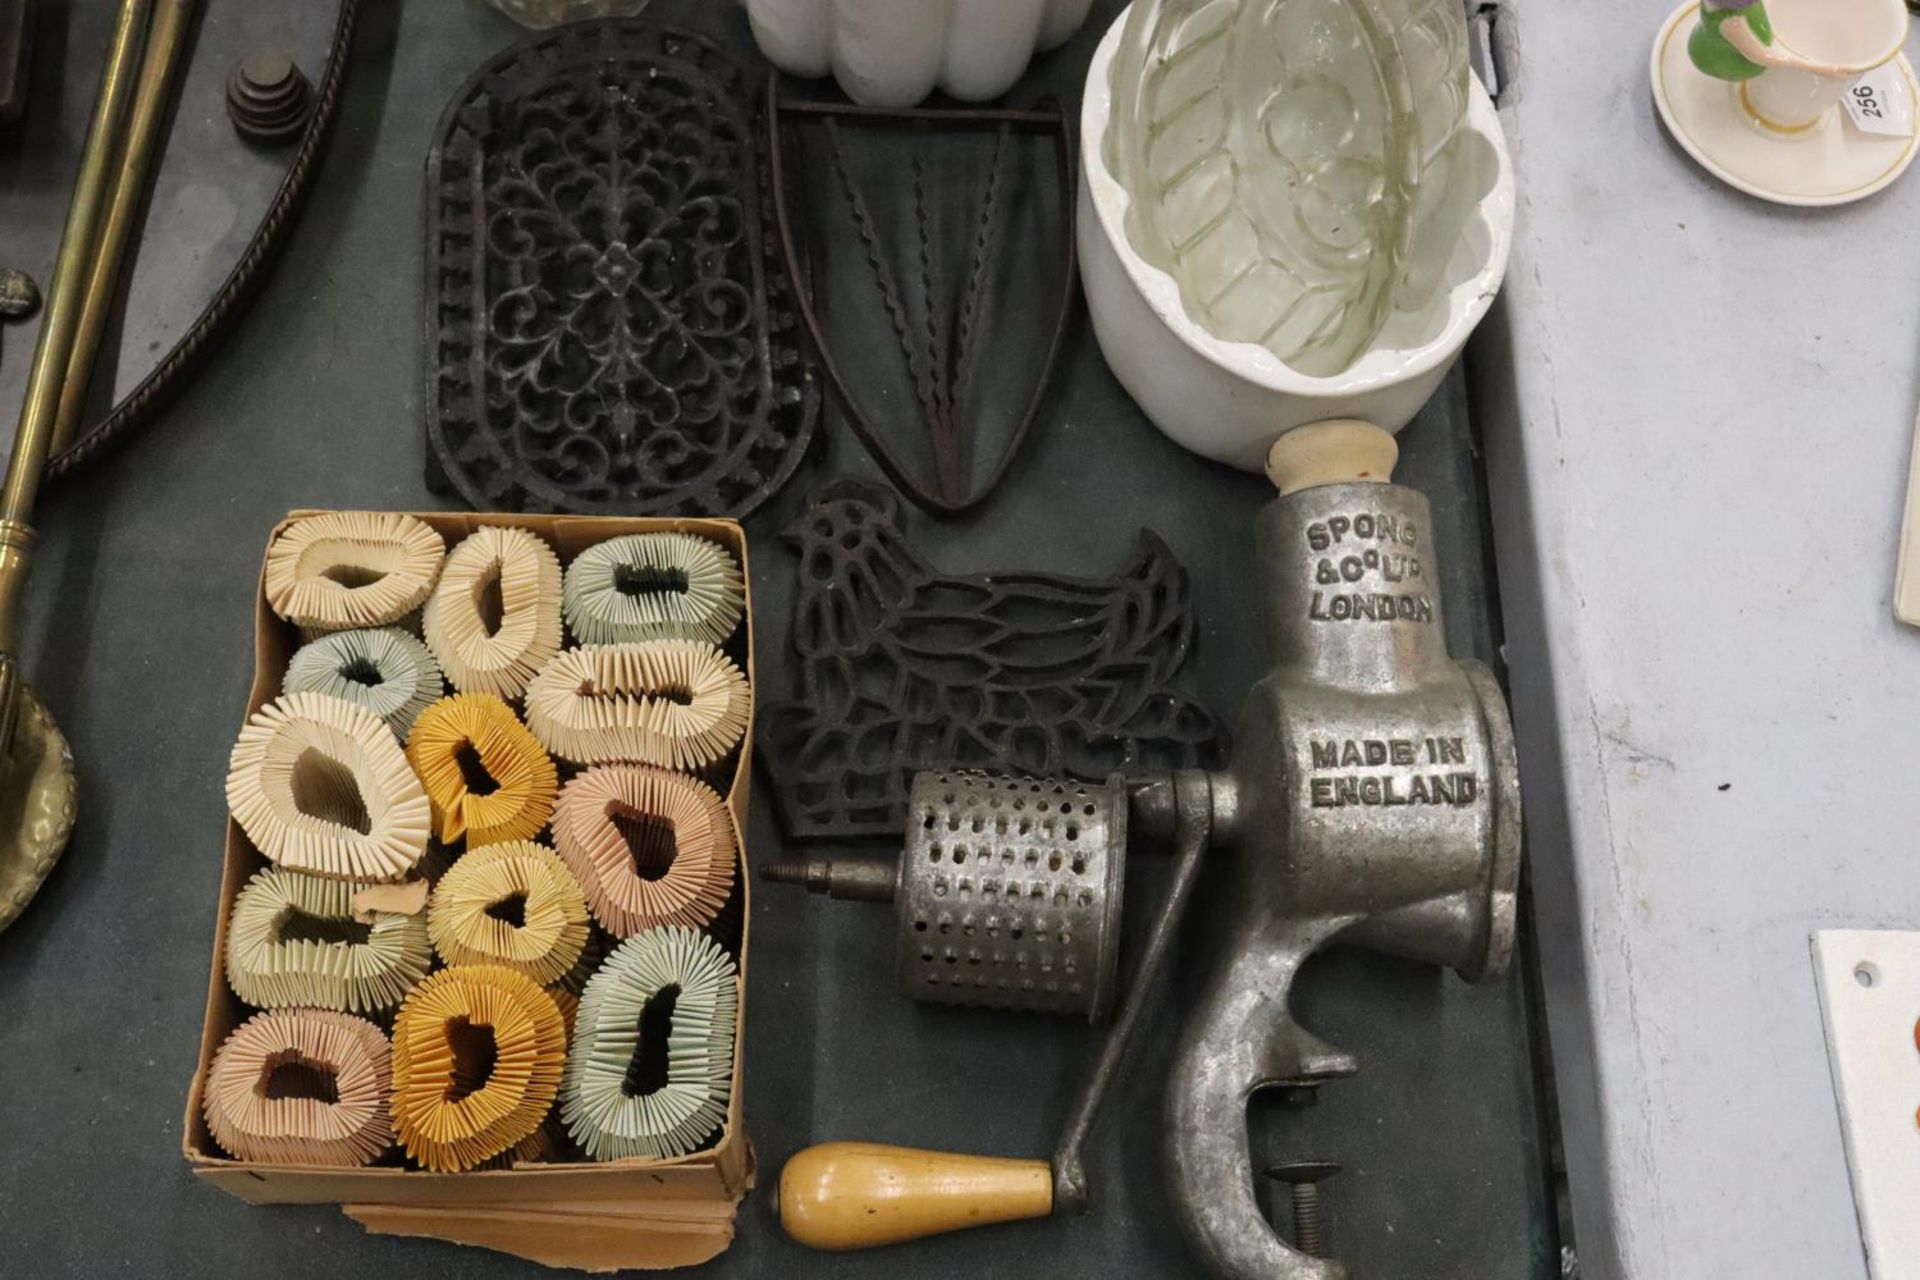 A MIXED LOT OF VINTAGE KITCHENALIA TO INCLUDE CERAMIC AND GLASS MOULDS, PIE DISH COLLARS, CAST - Image 4 of 5